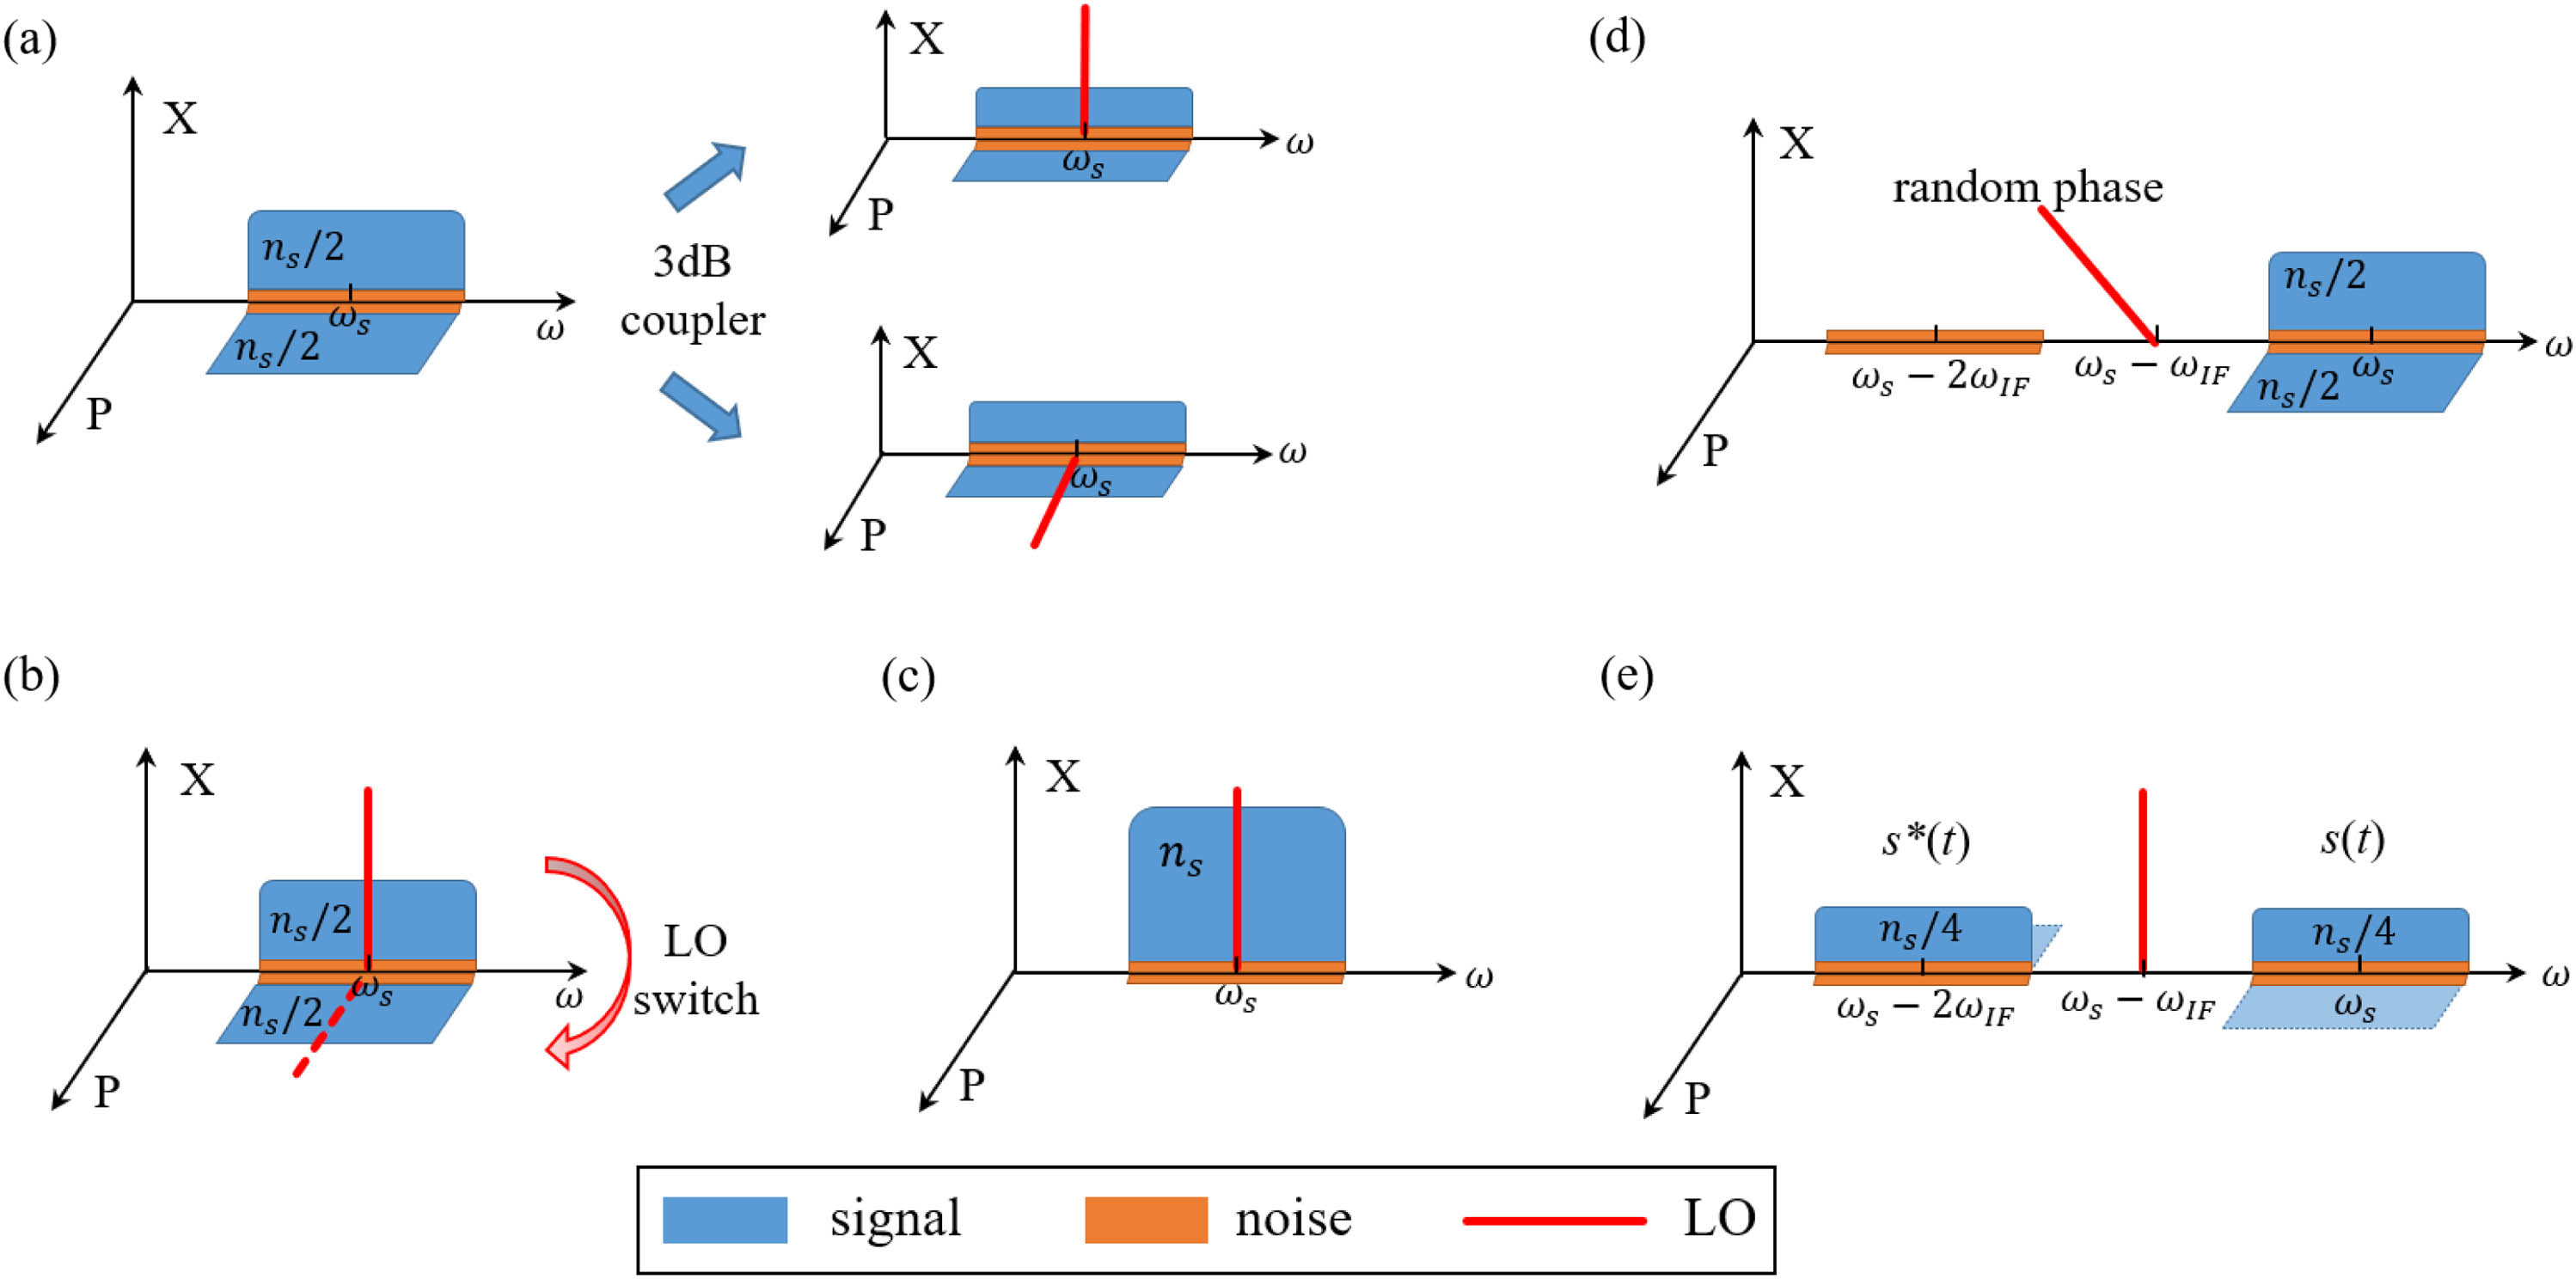 Optical spectra of different detection schemes with quadrature components representation. (a) Two-quadrature encoding with phase-diversity homodyne detection (2Q2D); (b) two-quadrature encoding with LO phase switching (2Q1D), showing a π/2 phase difference between the solid LO and the dashed LO; (c) single-quadrature encoding with LO phase-locked to the signal (1Q1D); (d) two-quadrature encoding with heterodyne detection at IF stage (sub-2Q2D); (e) phase-conjugated subcarrier encoding with phase-sensitive heterodyne detection (PCS).